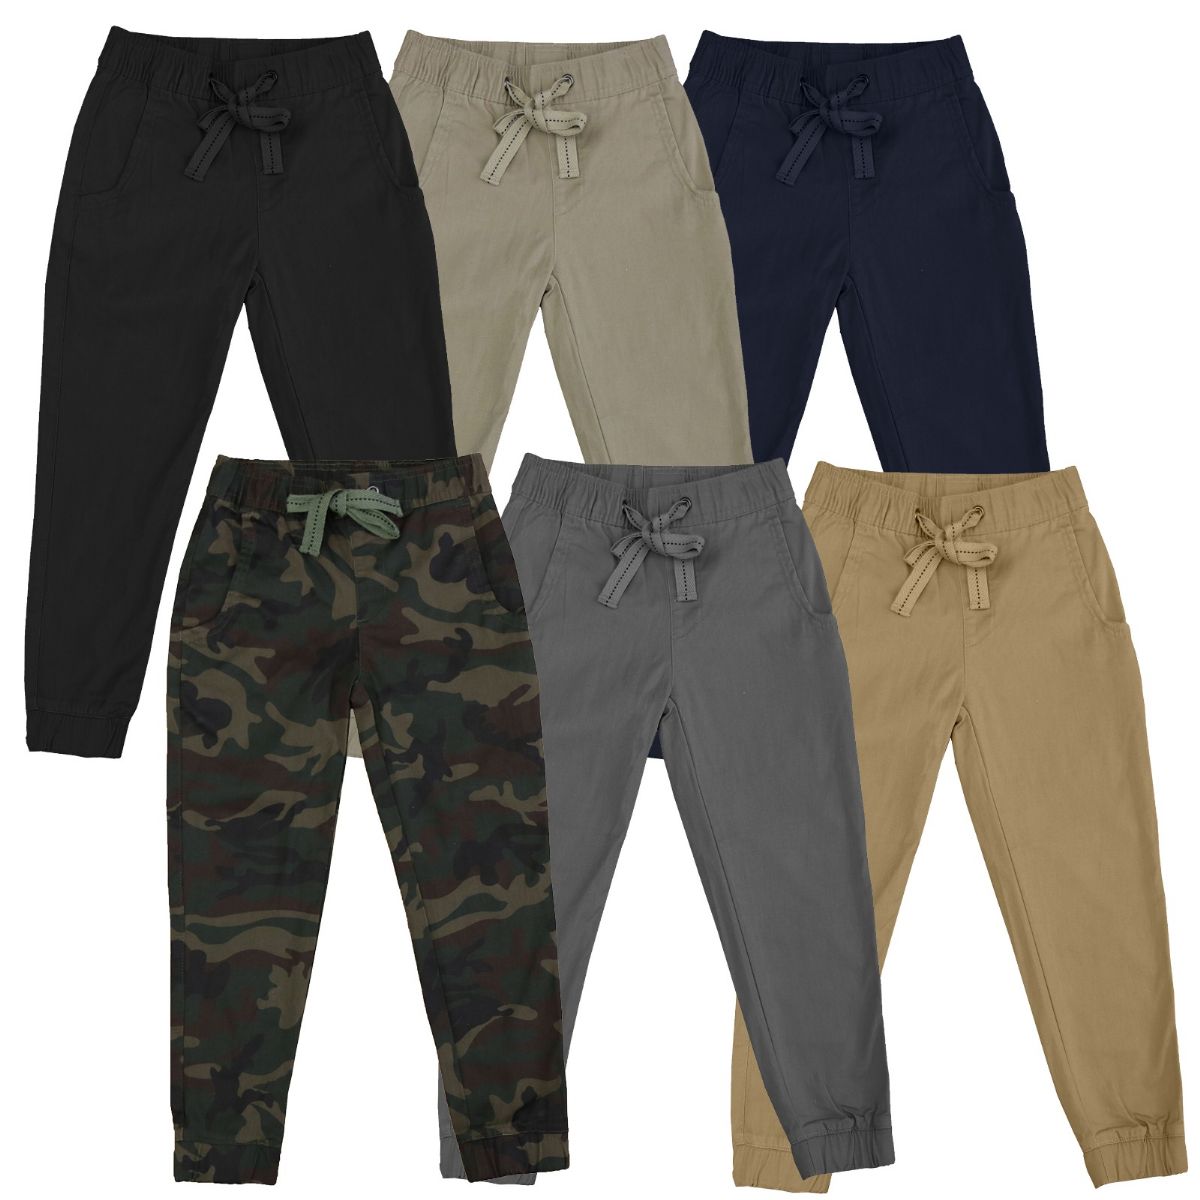 24 Pieces of Toddlers Boy Jogger Pants In Camouflage